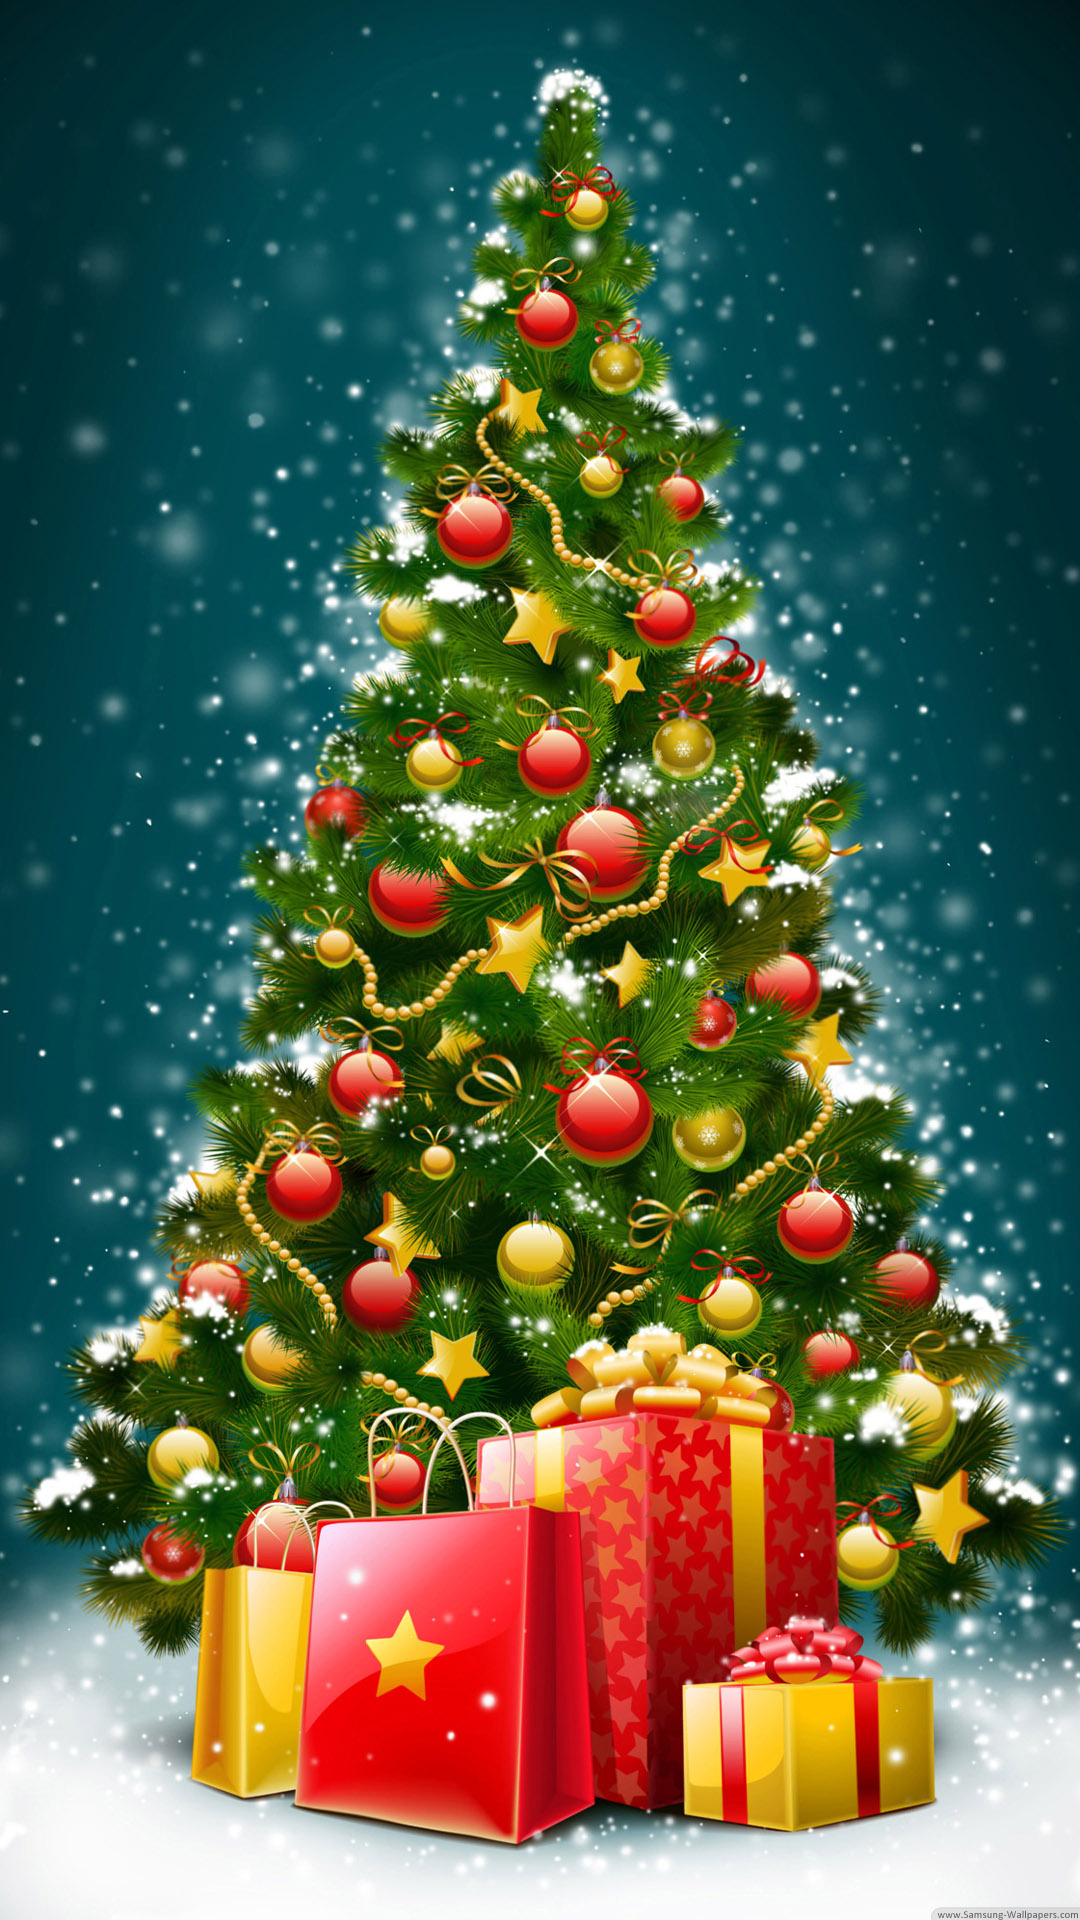 Christmas wallpaper for android androidwalls.org